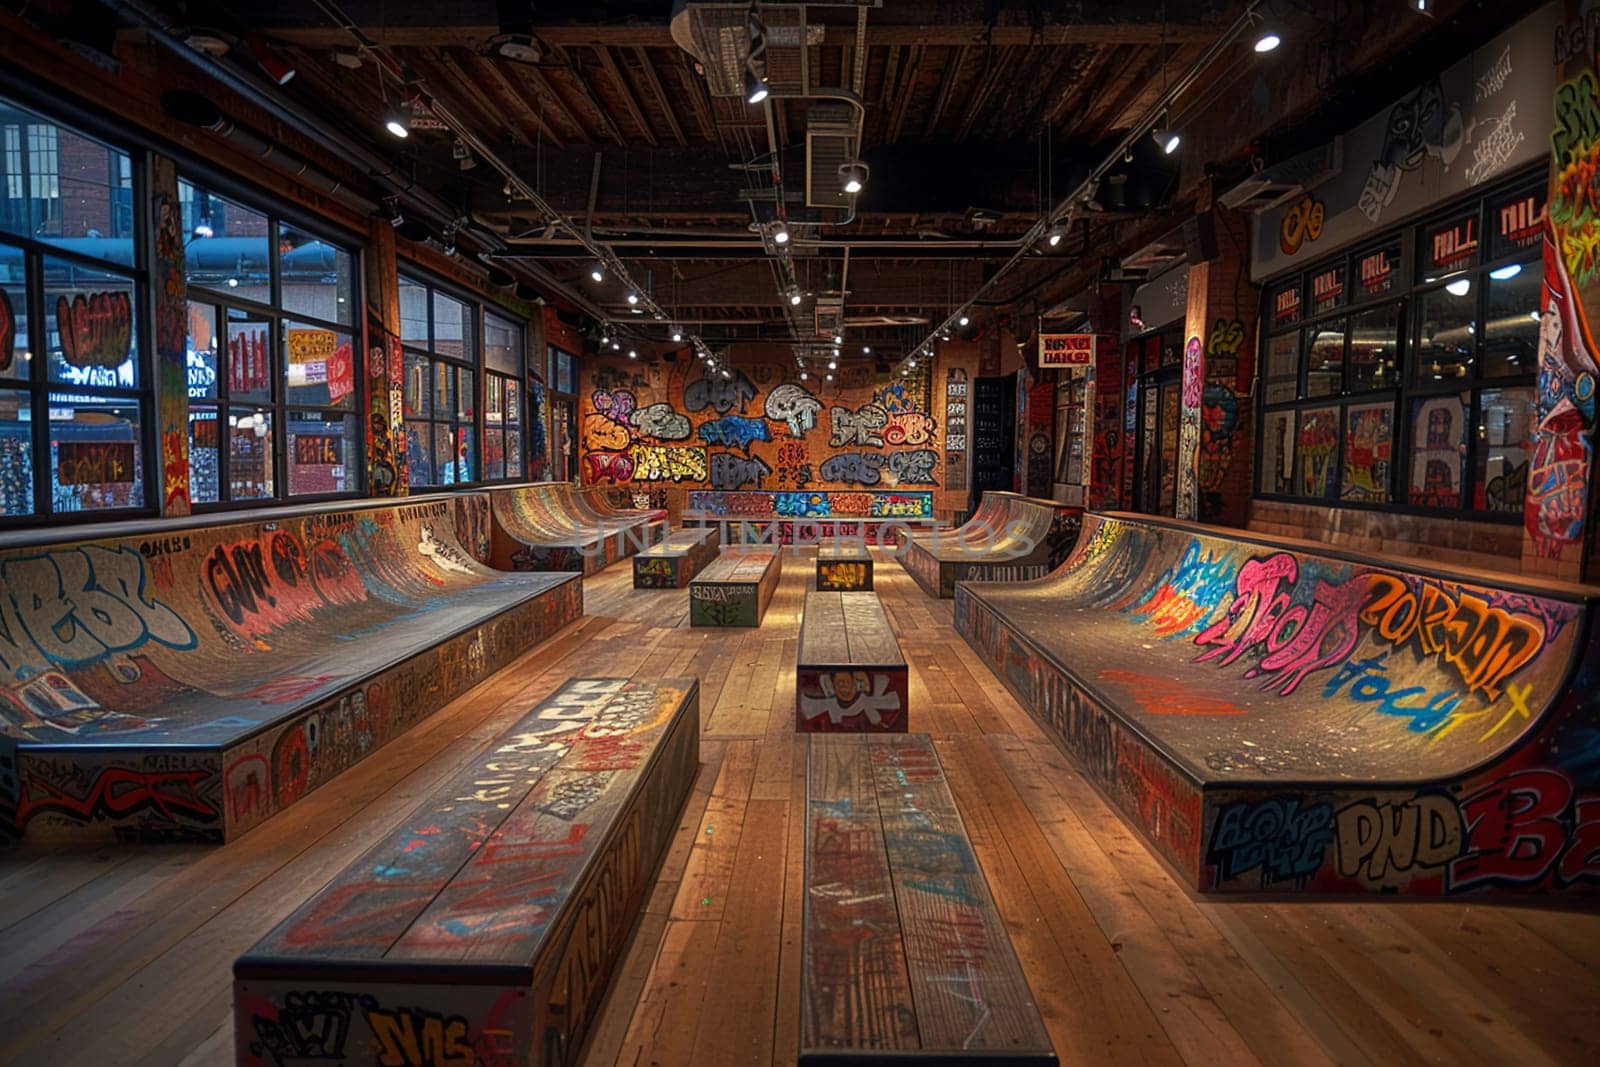 Skateboarding Urban Oasis Defines Cool in Business of Youth Culture and Extreme Sports, Skate decks and urban murals define cool and youth culture in the skateboarding urban oasis business.